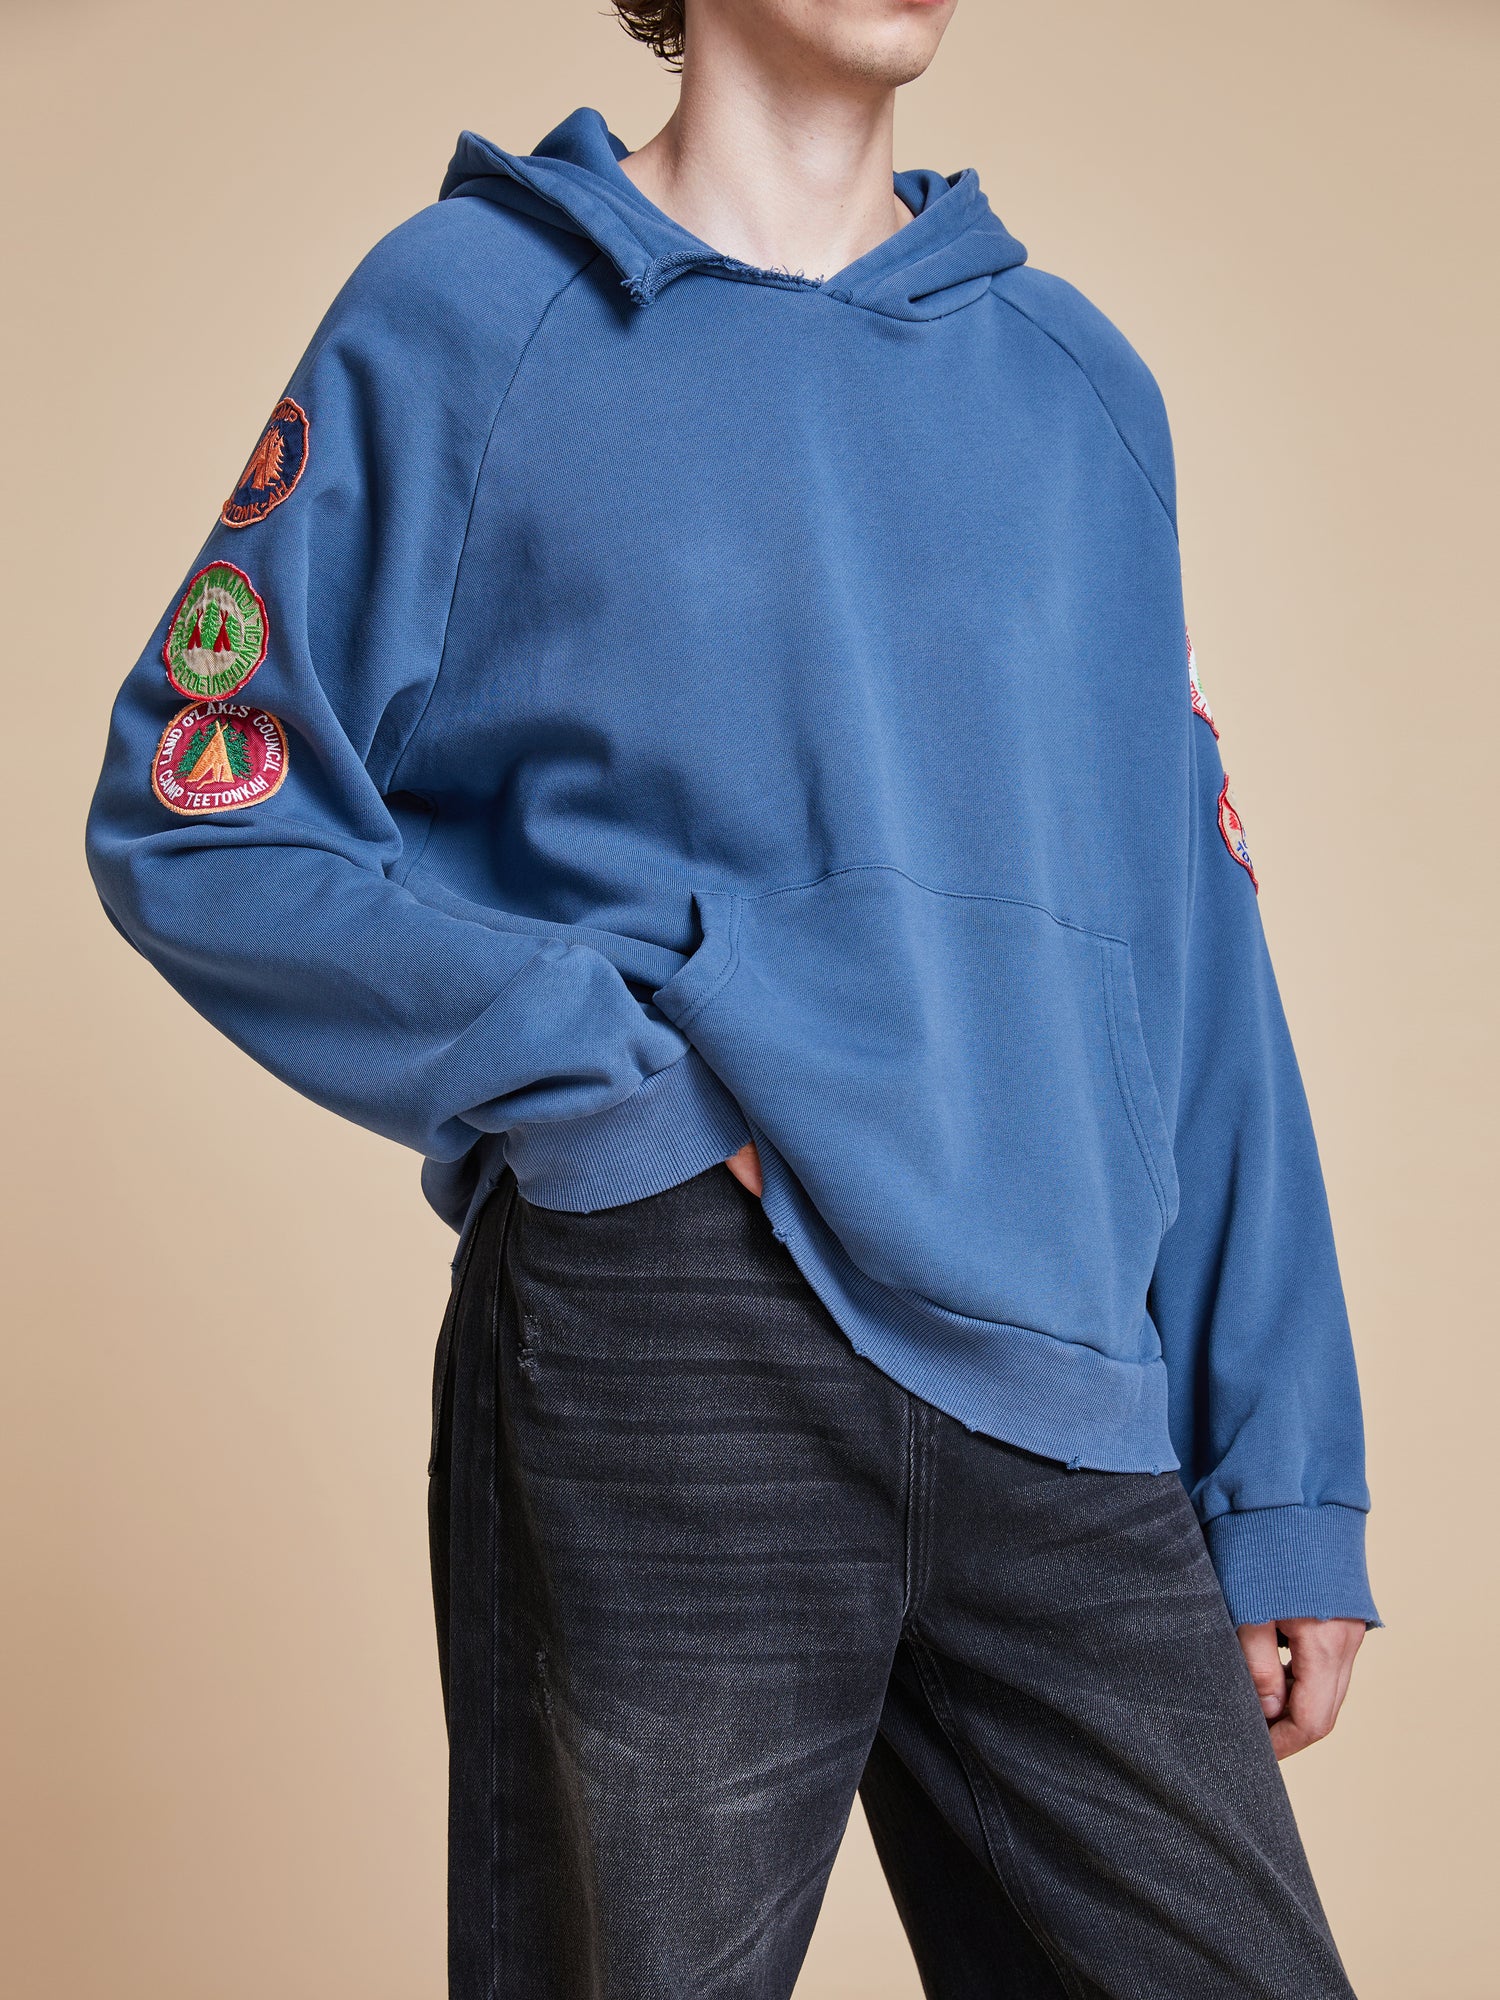 A man wearing a Timber Campground Hoodie by Found and jeans.